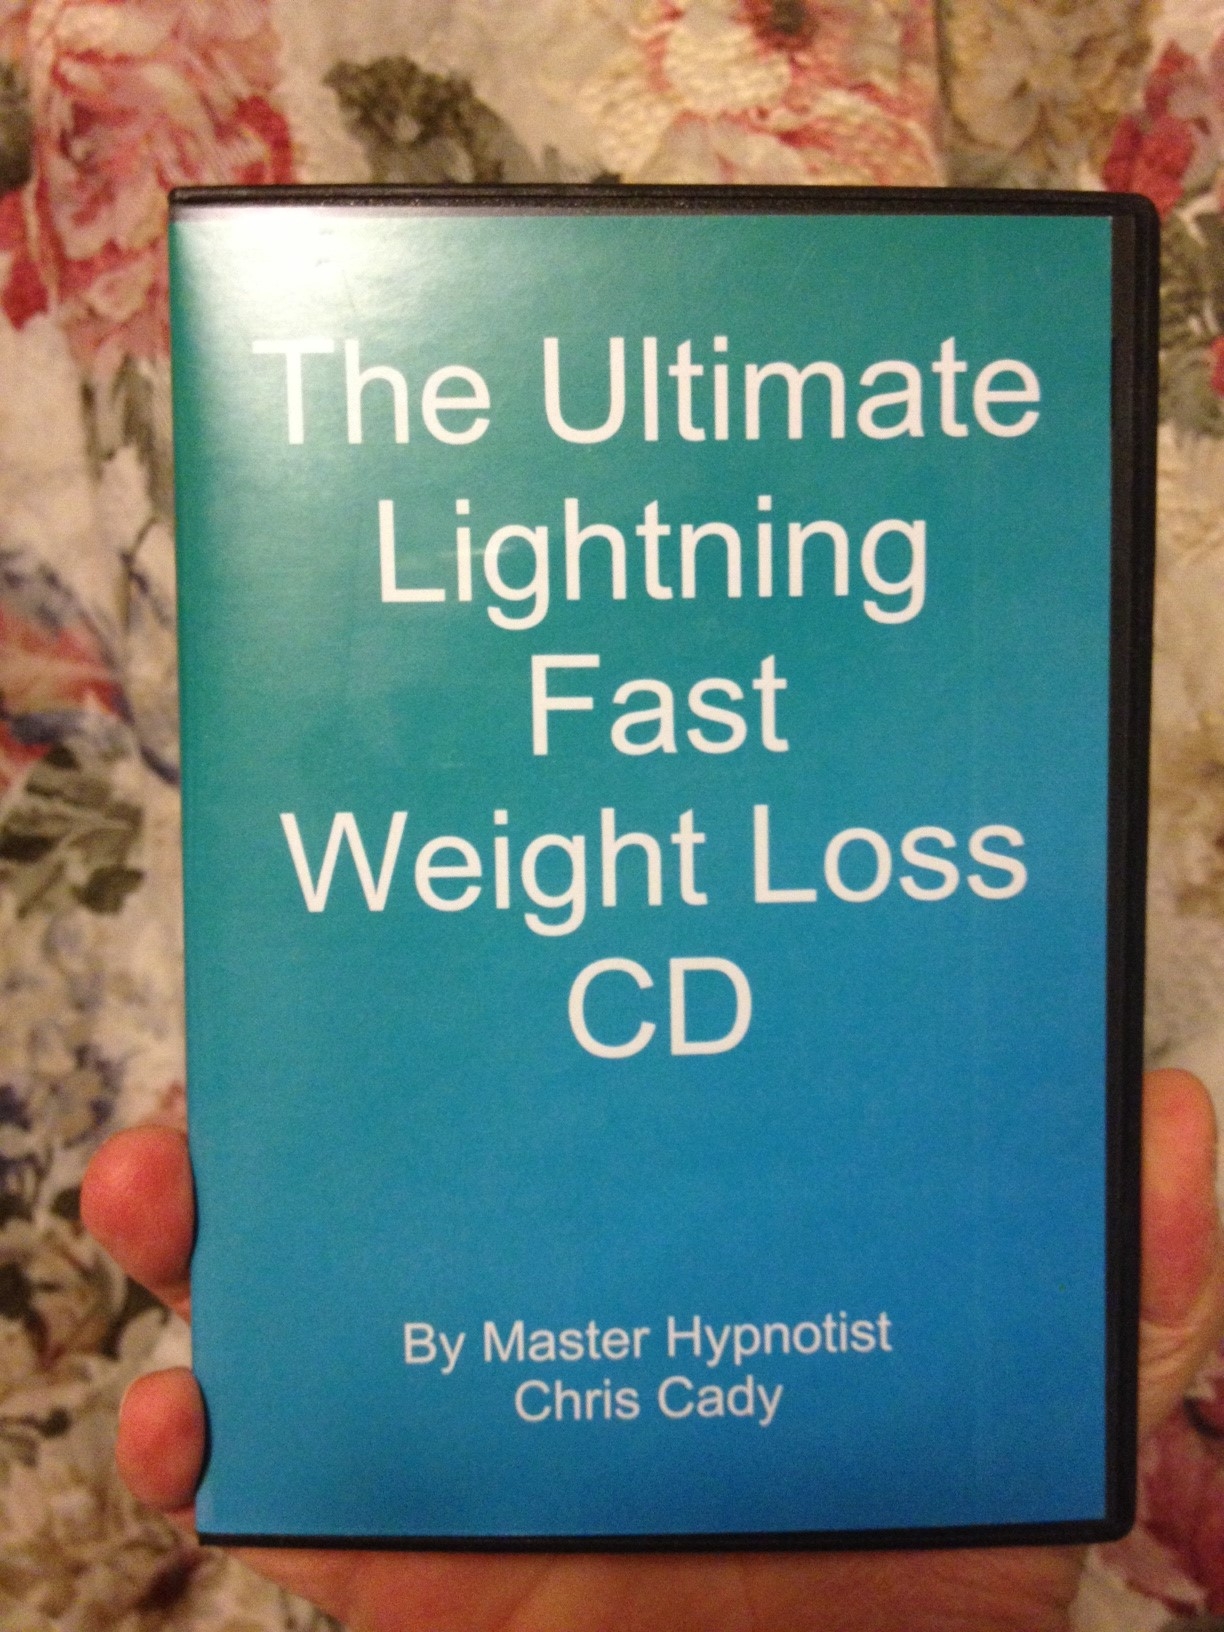 hypnosis weight loss cd mp3 for men and women